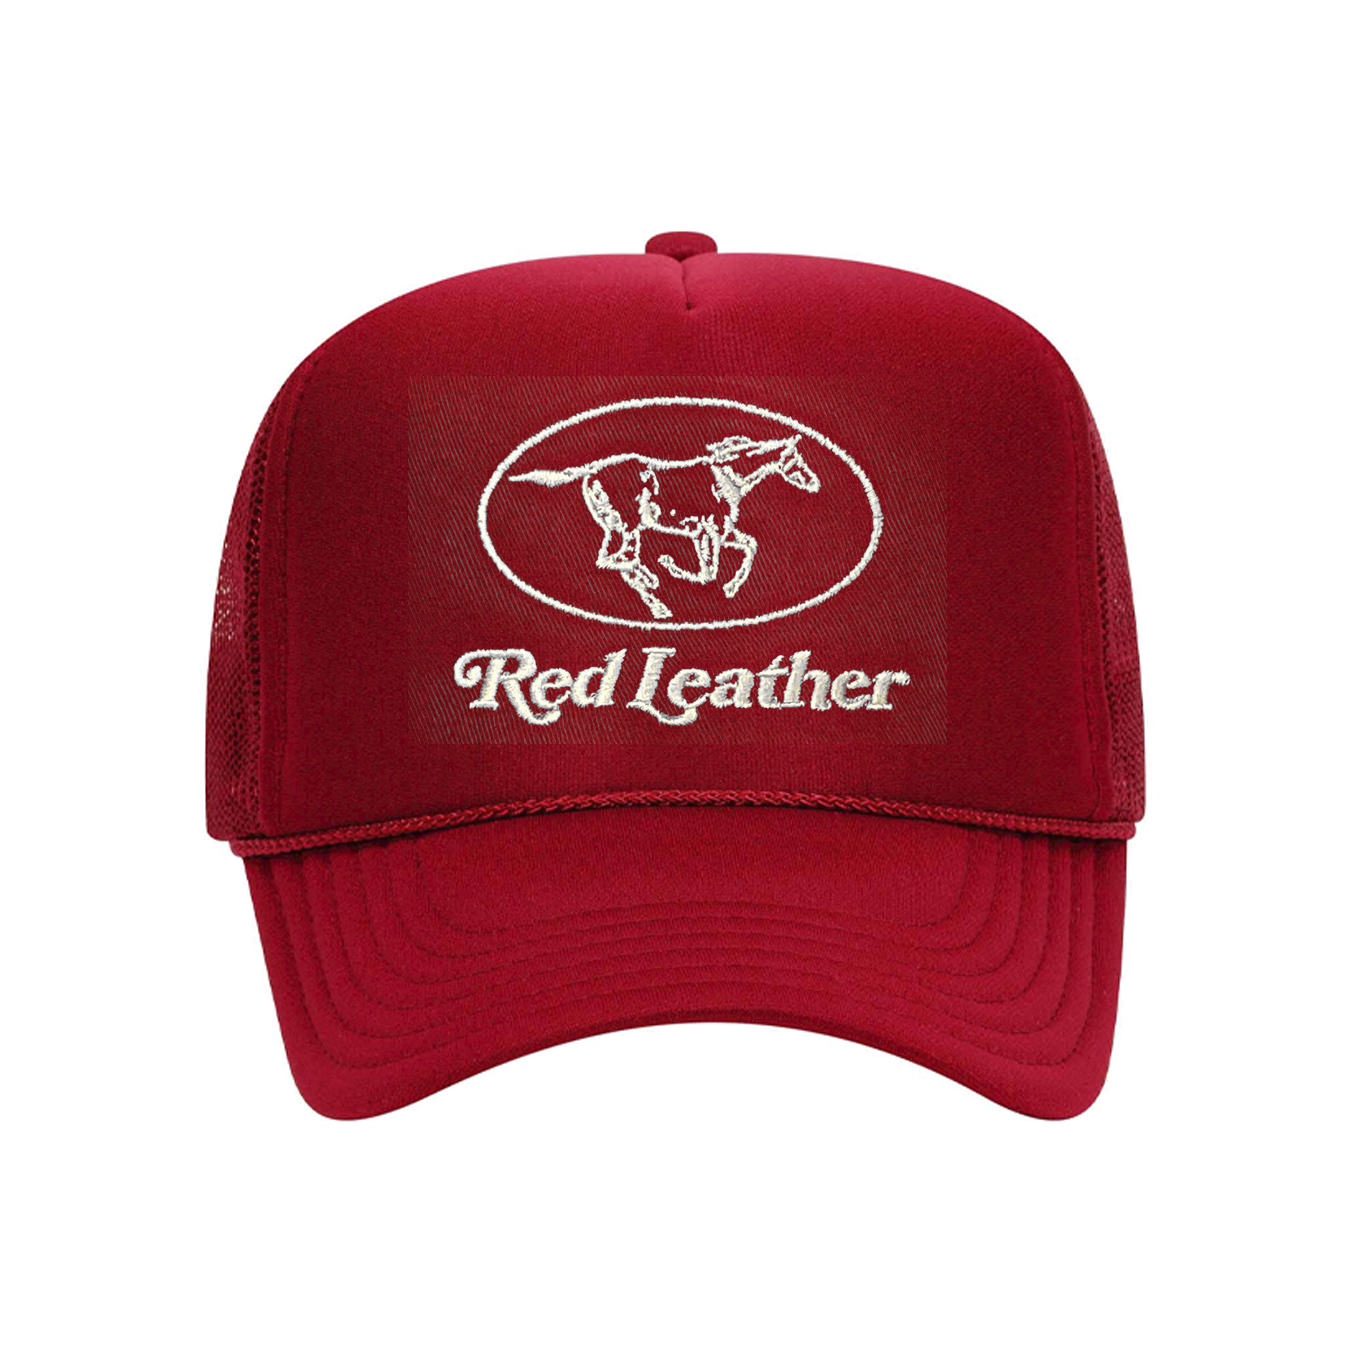 RED LEATHER TOUR TRUCKER HAT